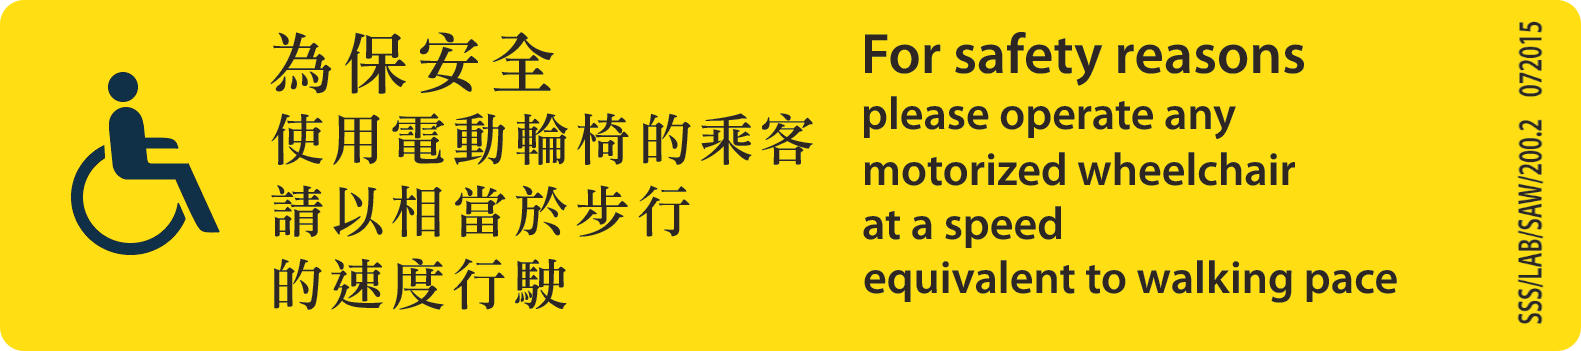 MTR sticker: Please operate any motorized wheelchair at a speed equivalent to walking pace